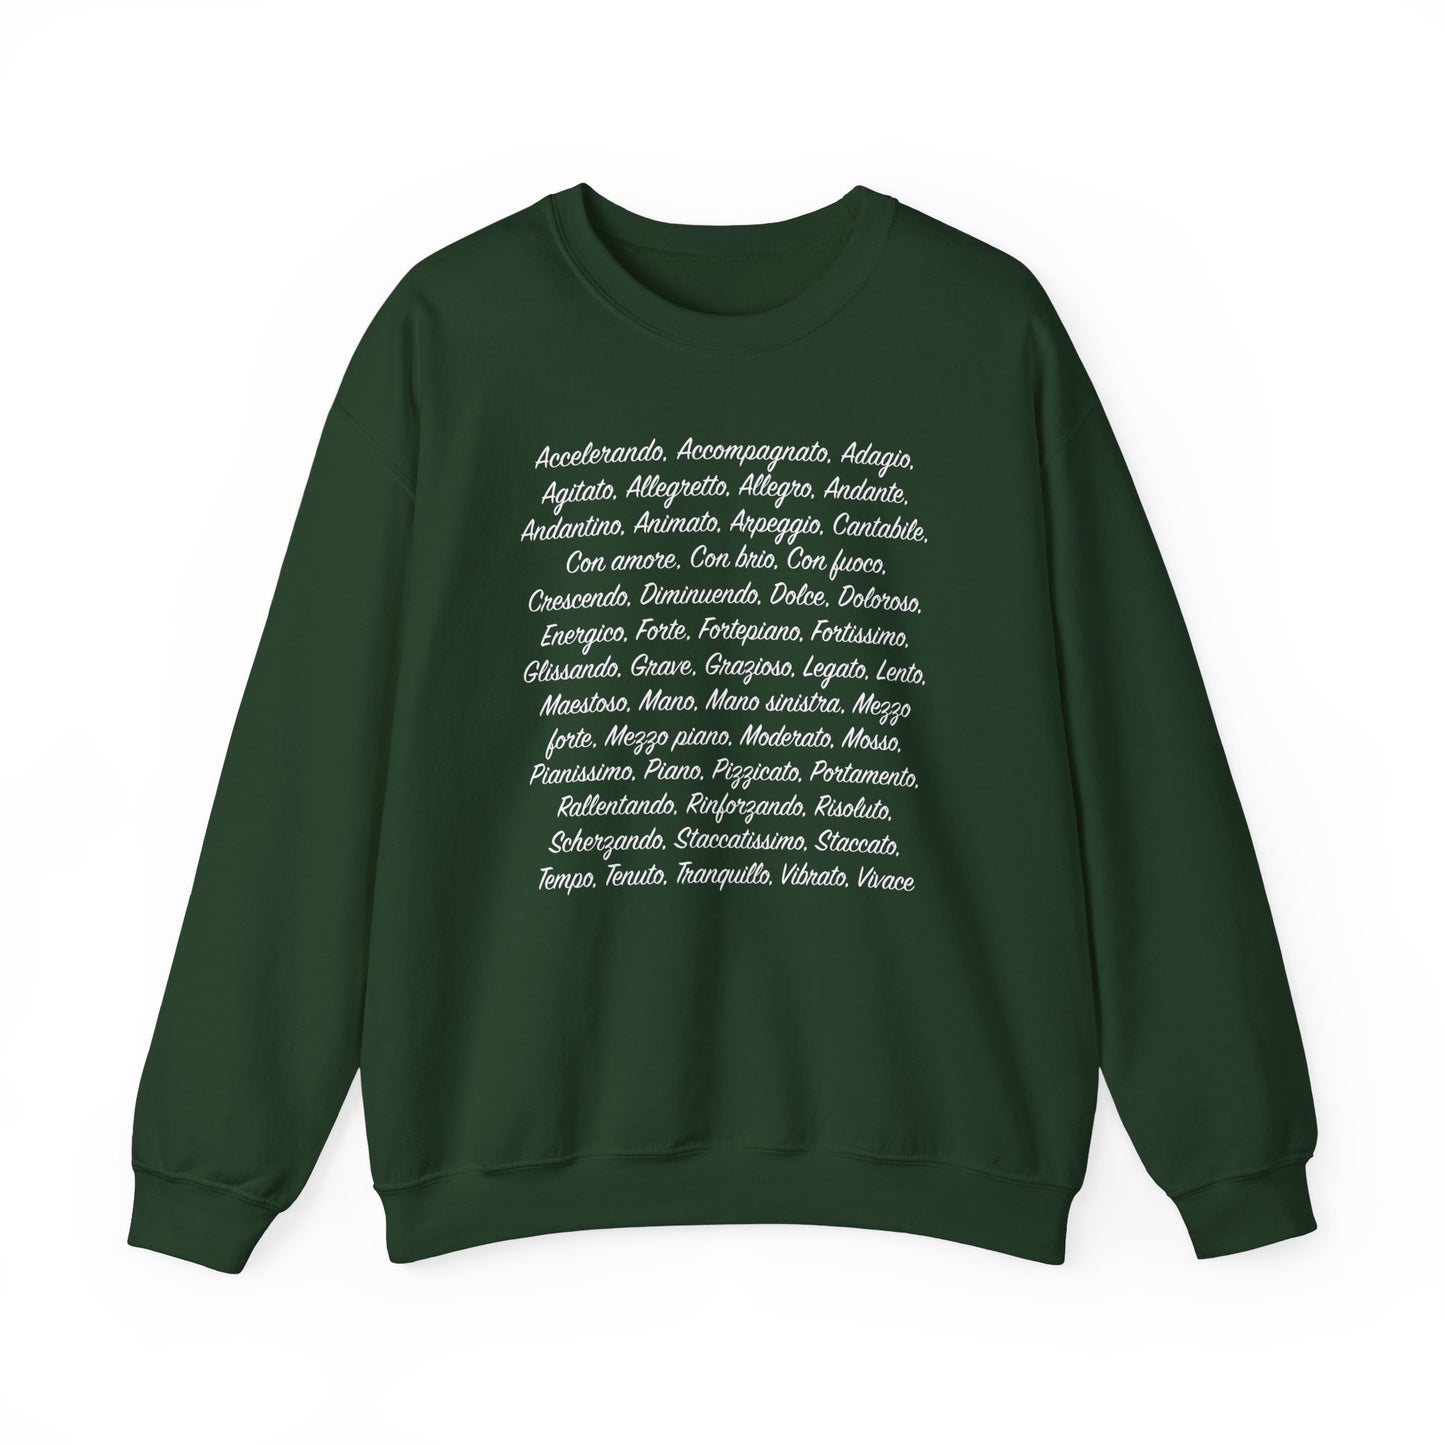 Musical Terms in Italian,  Unisex Heavy Blend Crewneck Sweatshirt, Classical Music Fan or Musician gift, dark colors, warm and comfortable, full list terminology